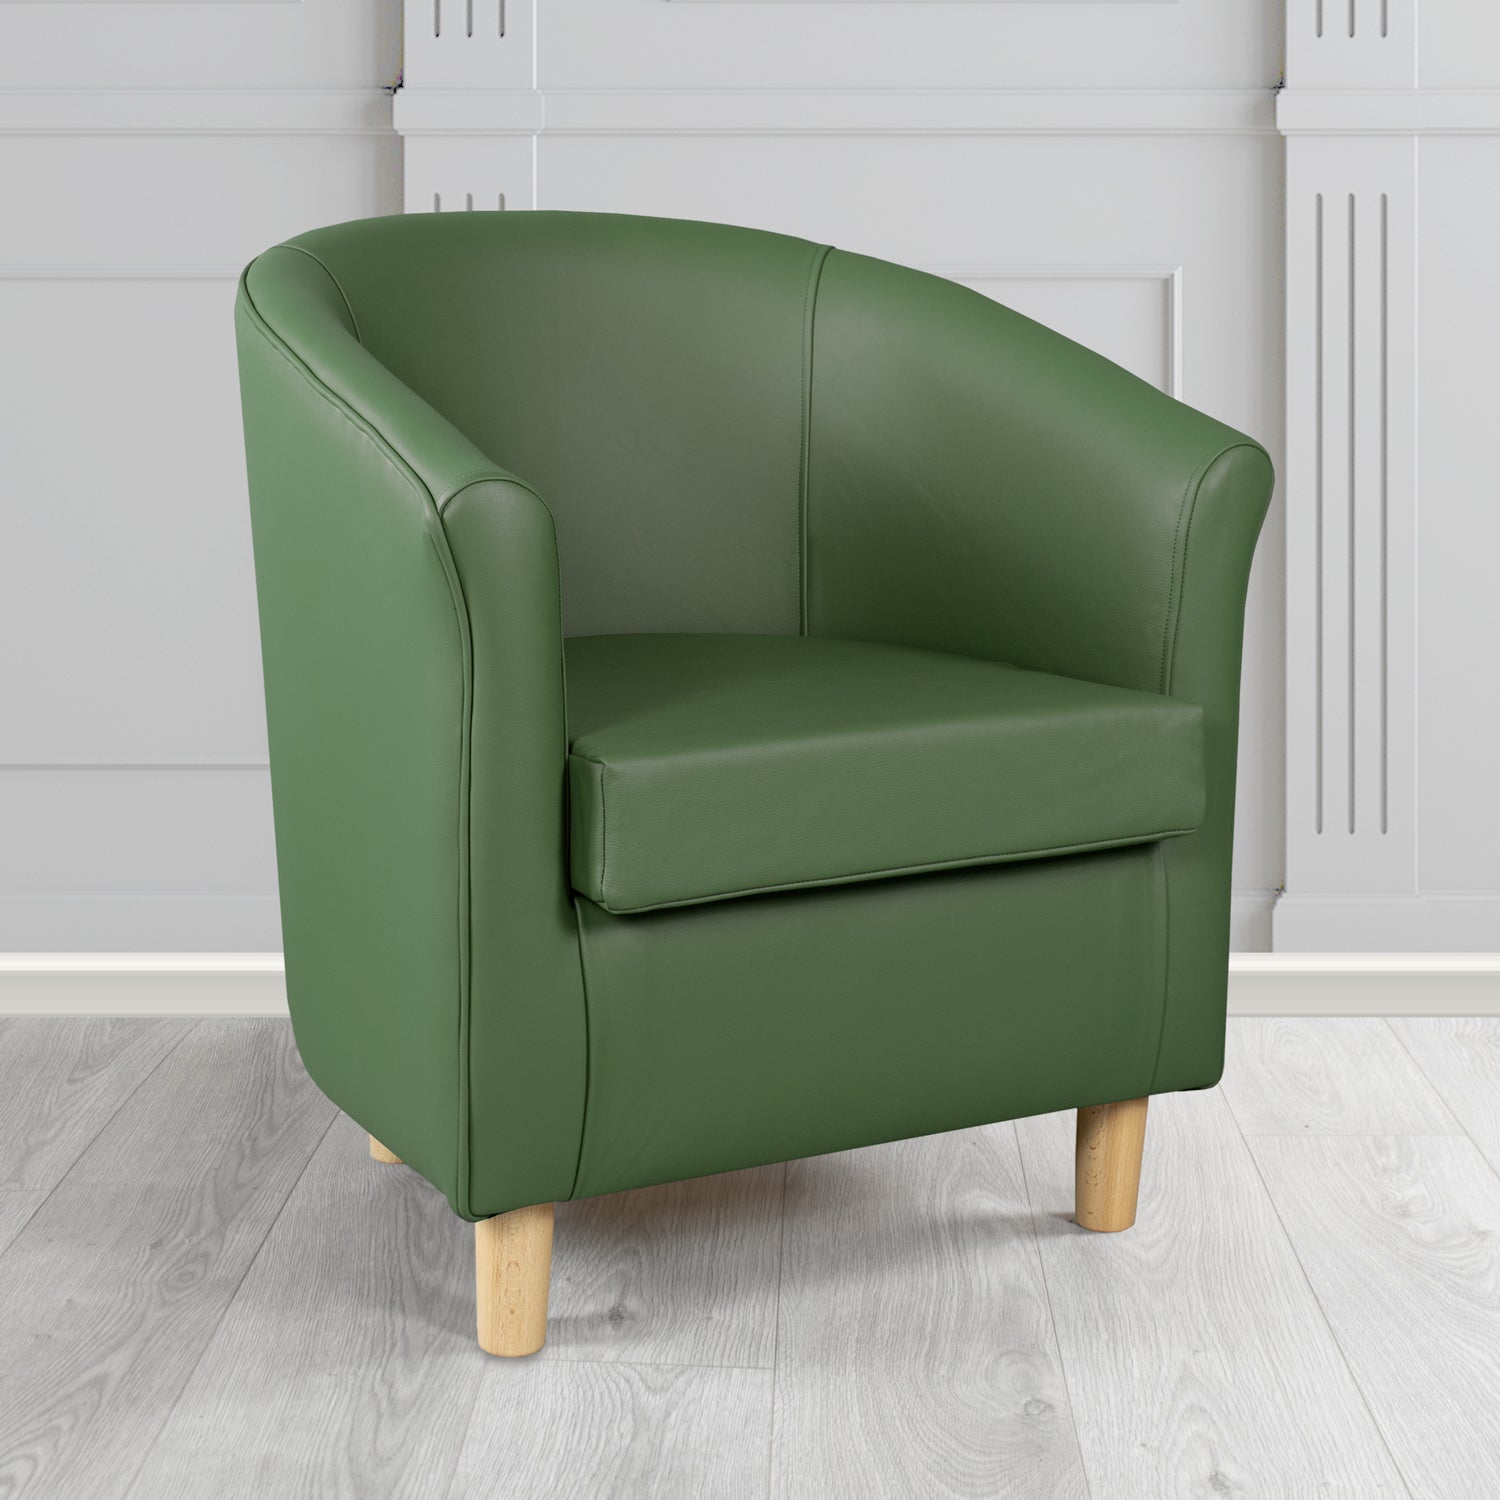 Tuscany Shelly Forest Green Crib 5 Genuine Leather Tub Chair - The Tub Chair Shop